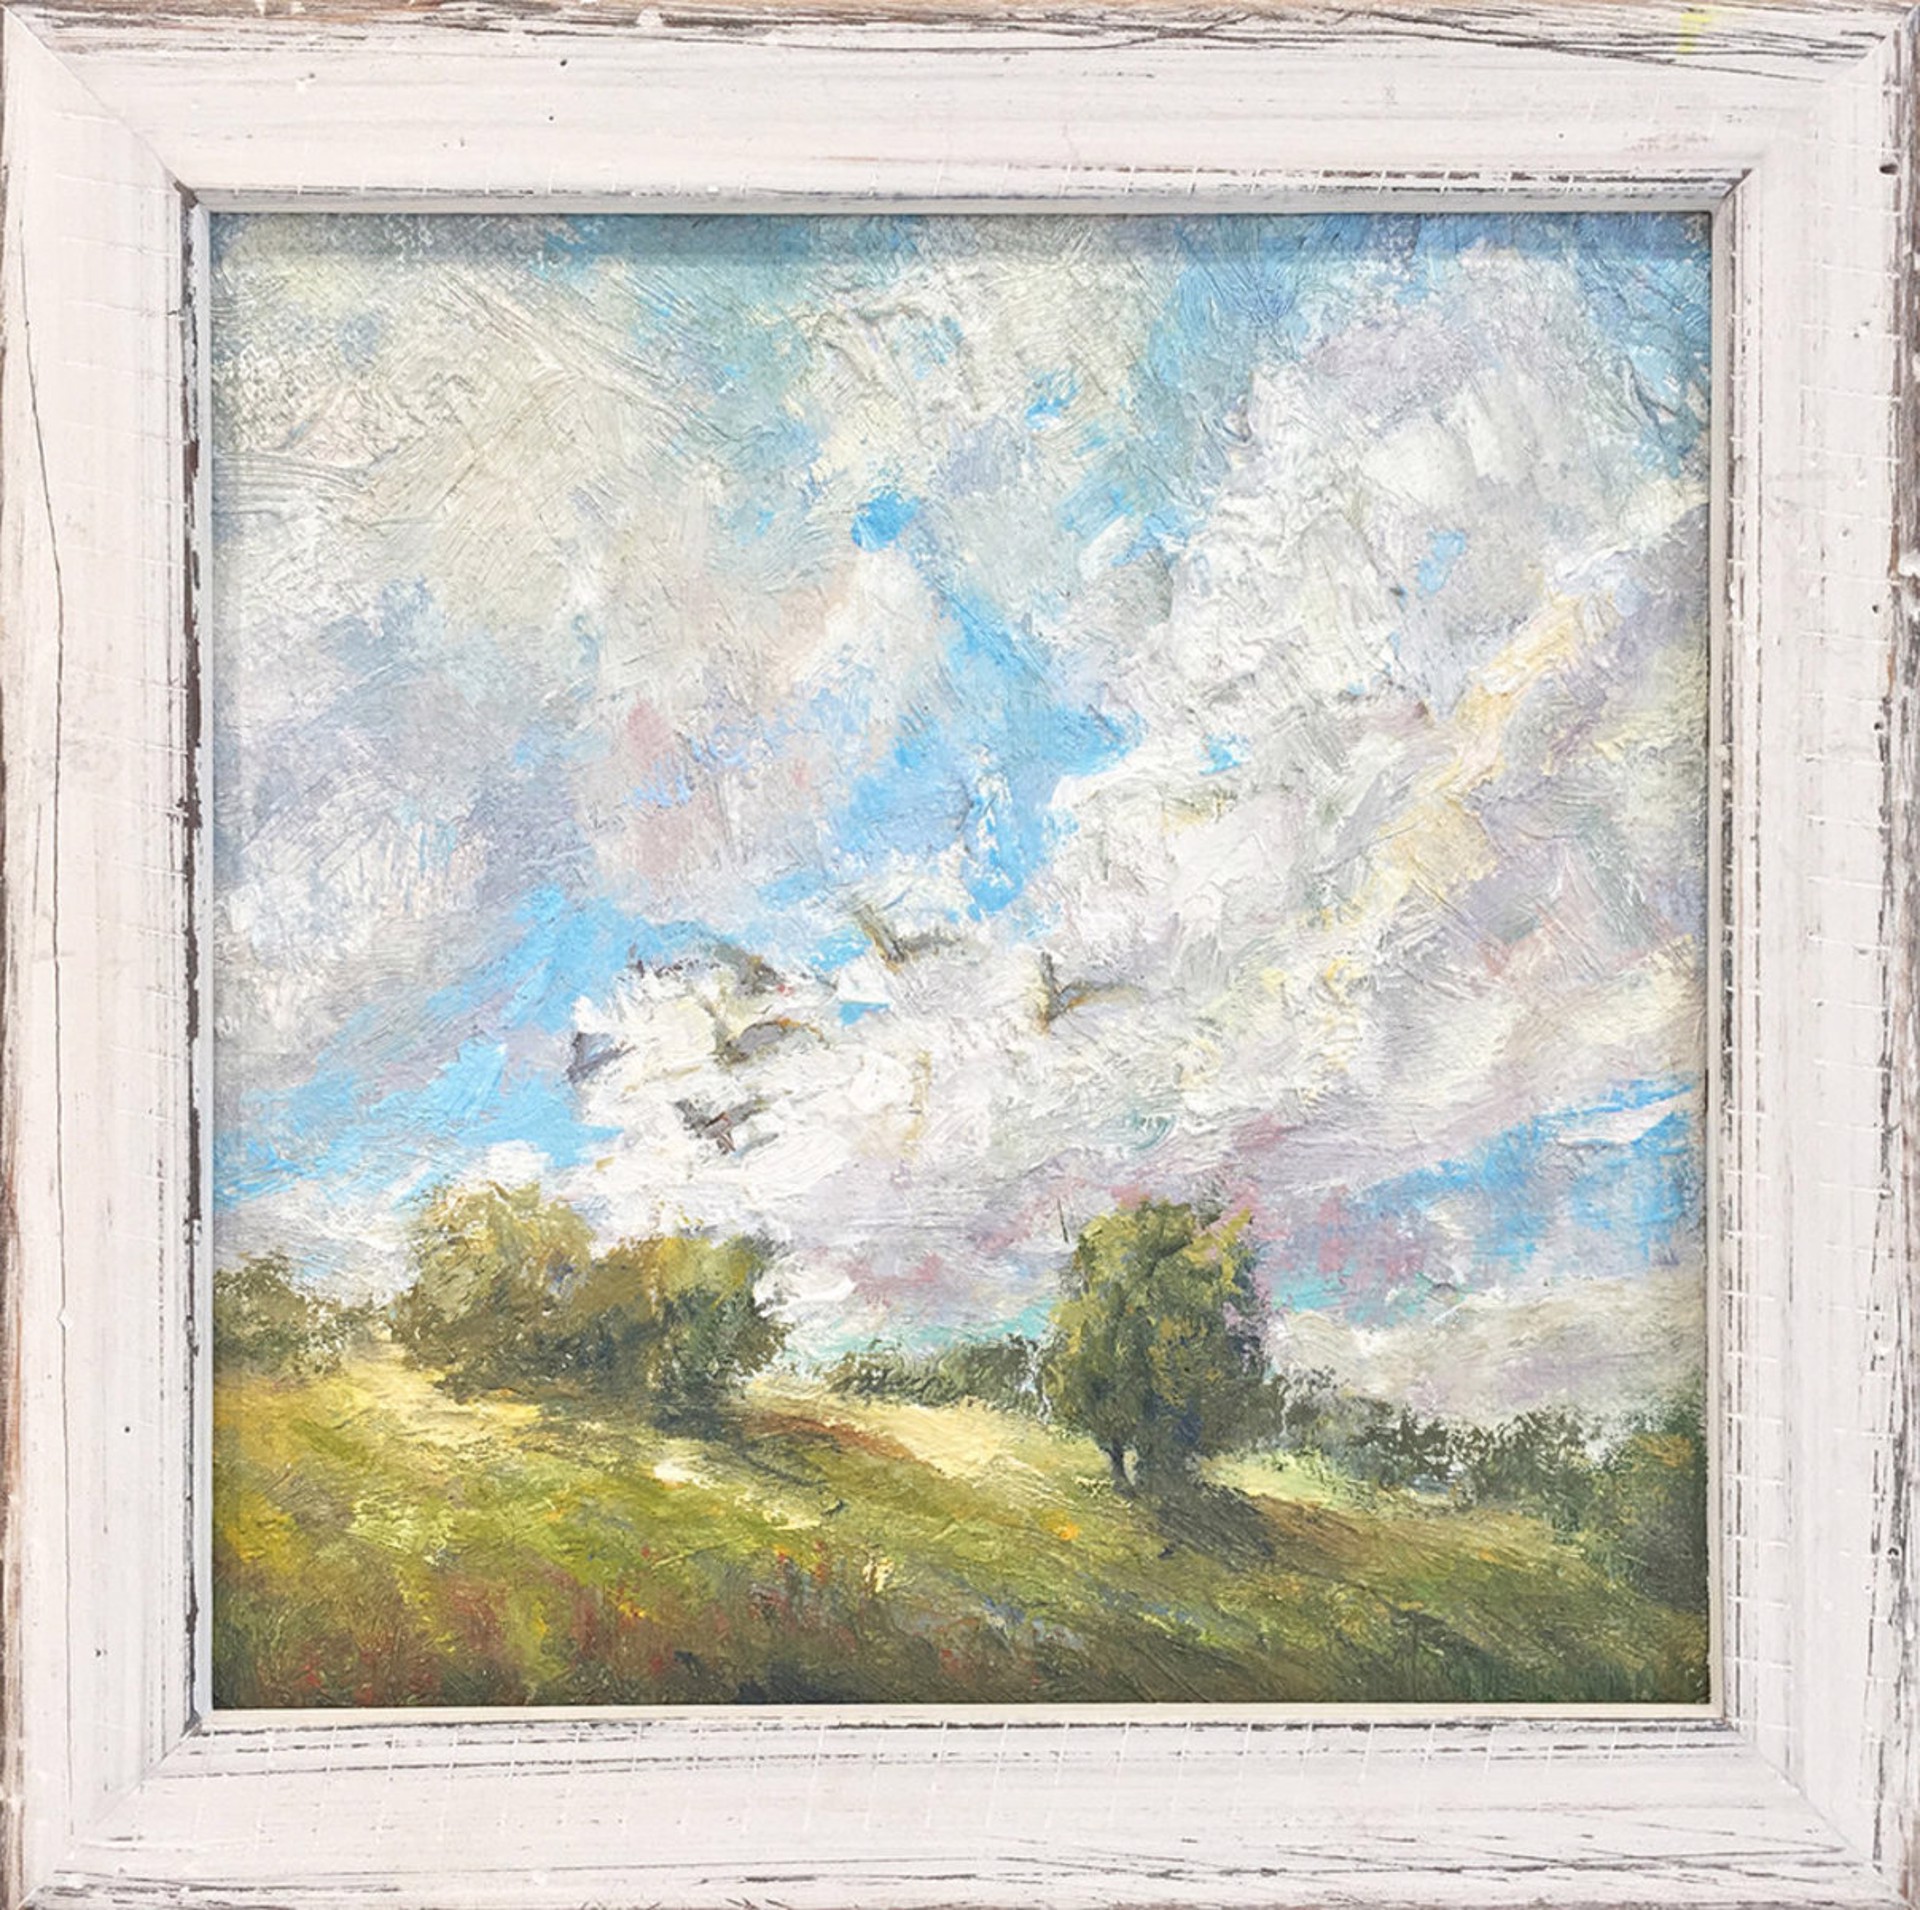 Farm Field with Clouds and Birds (L555) by Joan Horsfall Young